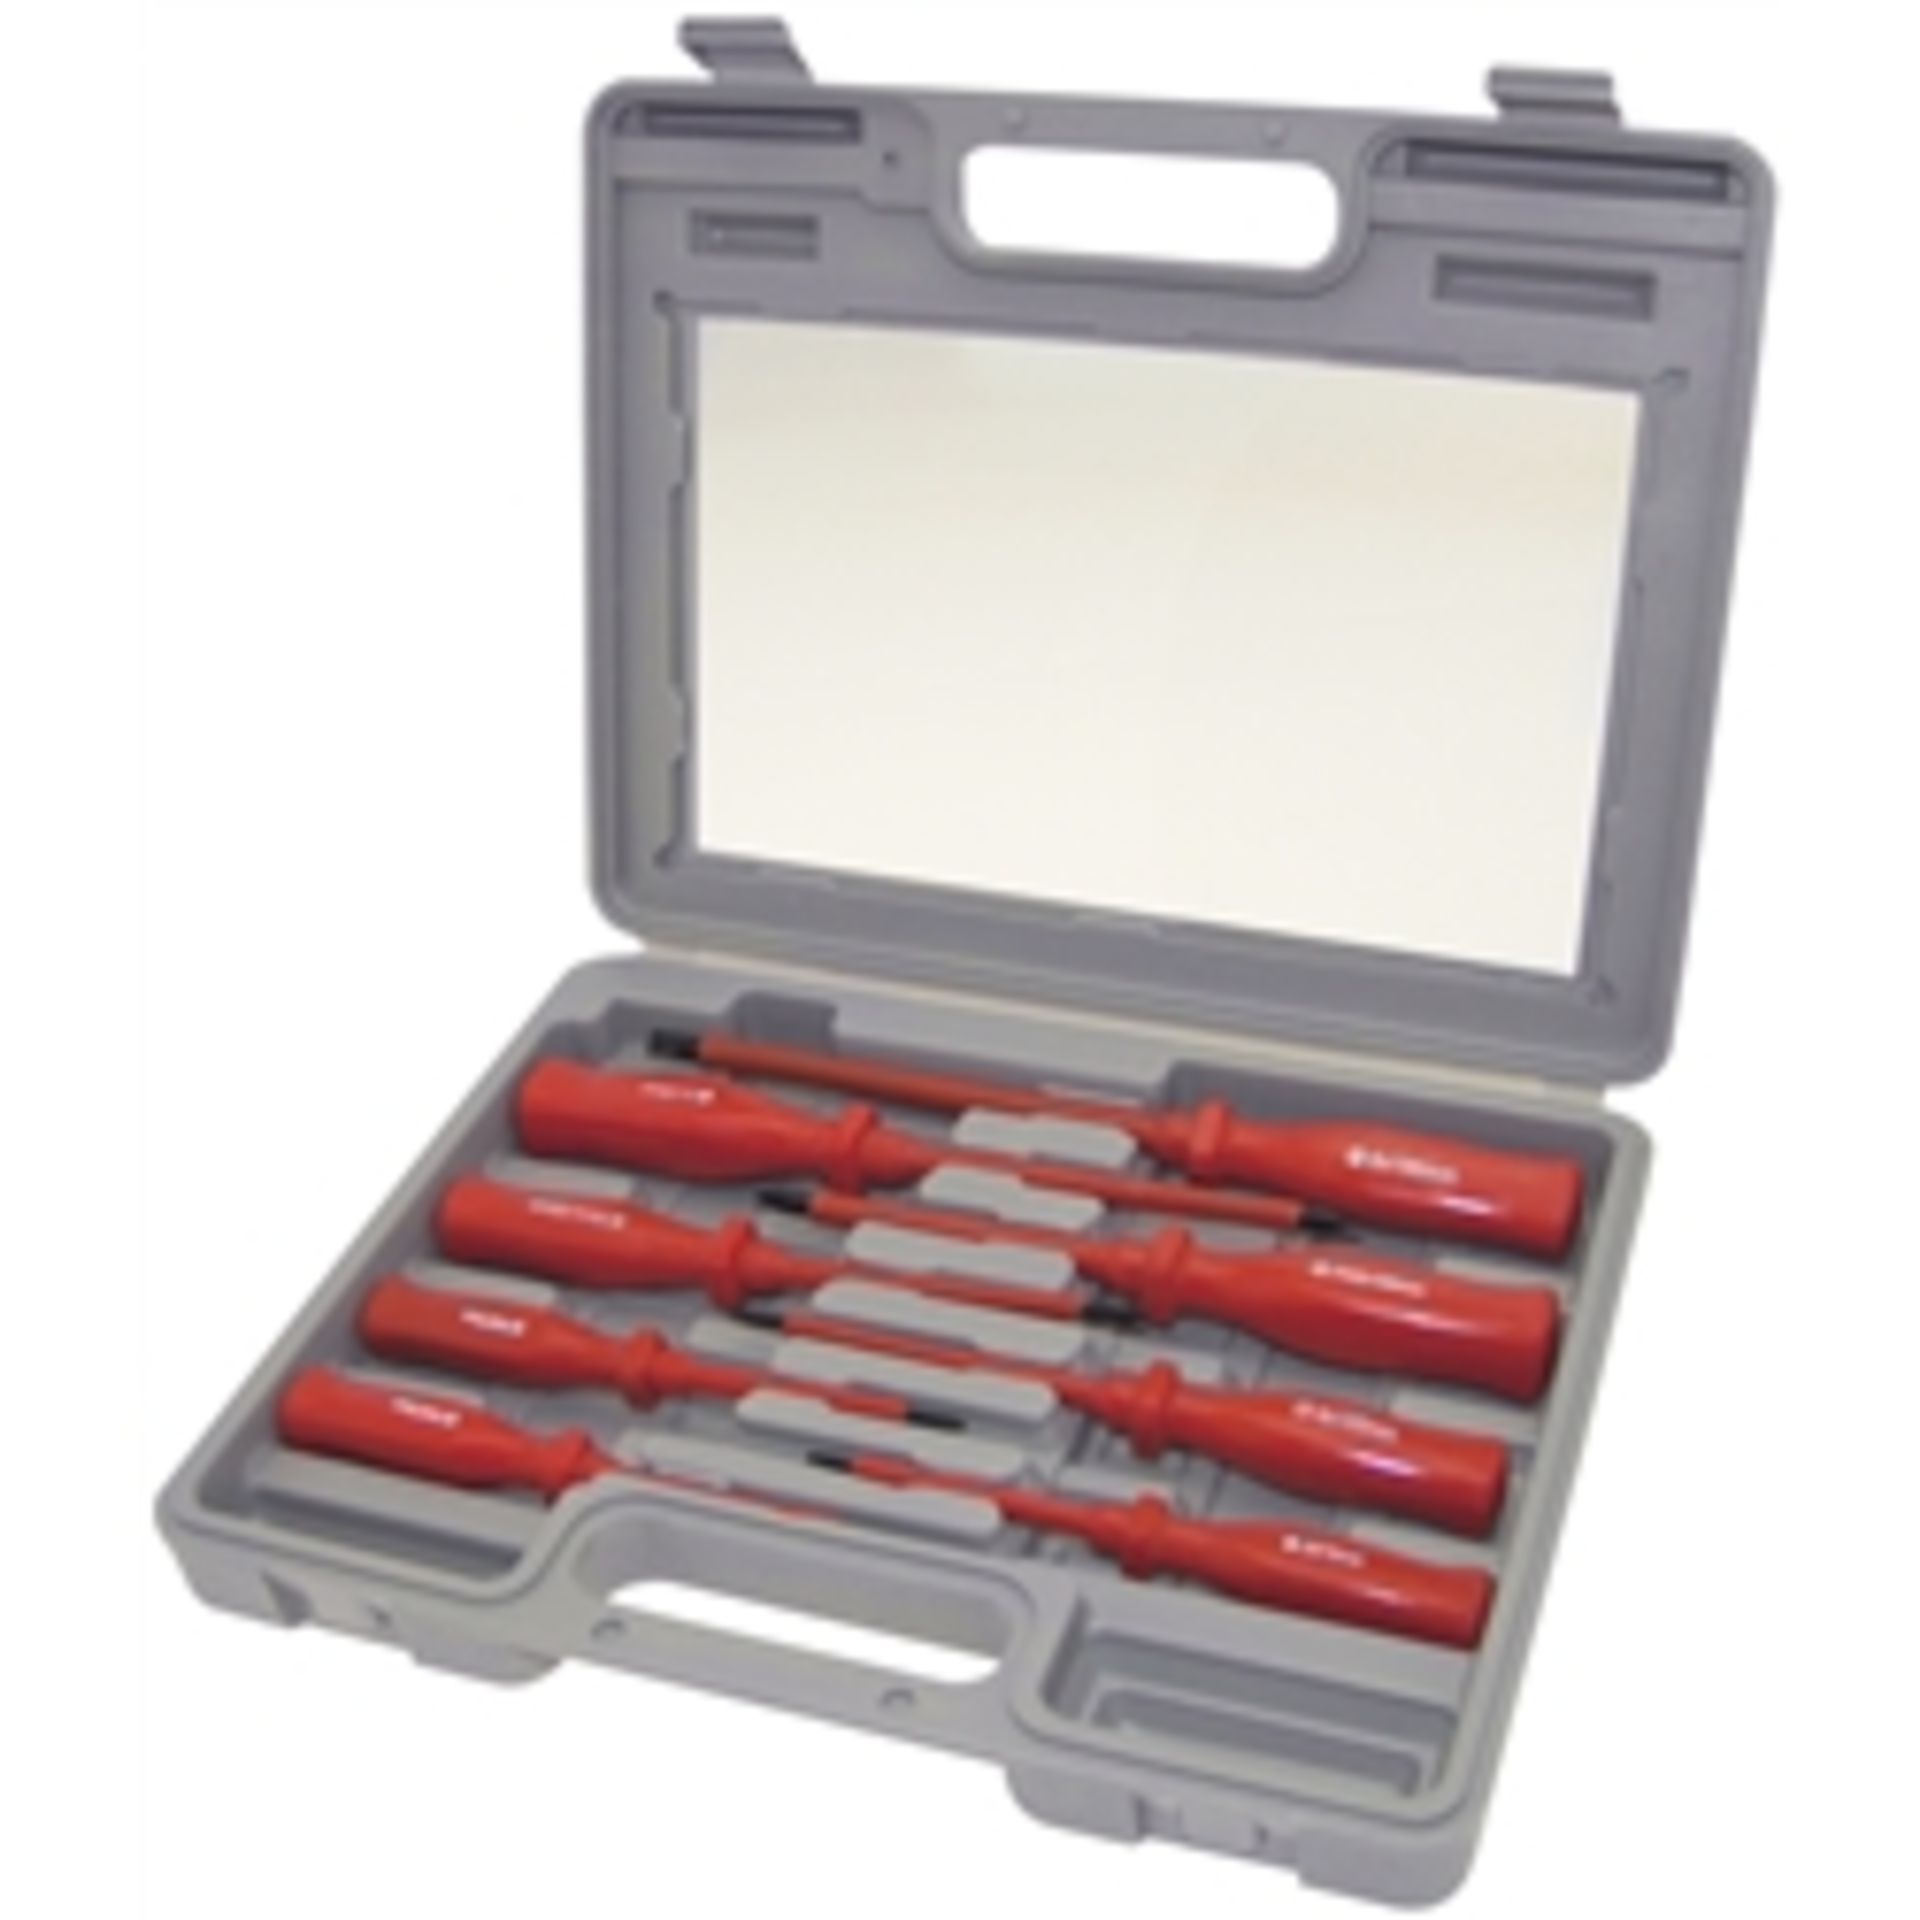 V *TRADE QTY* Brand New Eight Piece Screwdriver Set In Carry case X 3 YOUR BID PRICE TO BE - Image 2 of 2